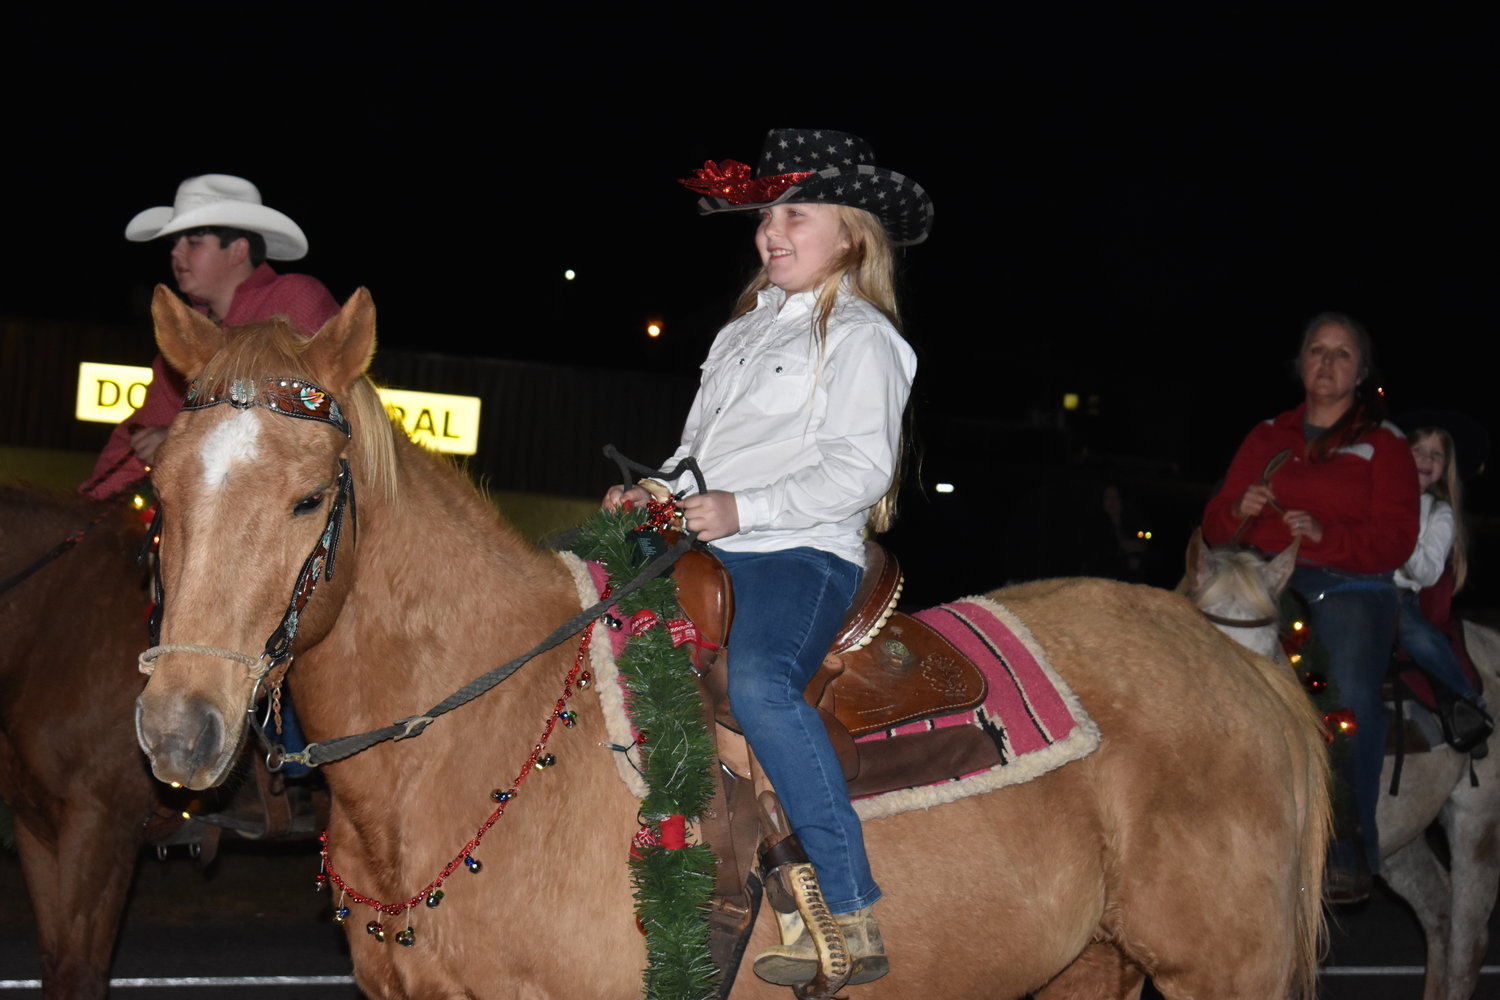 PHOTO GALLERY East Walker Christmas Parade marches over Dora, Sumiton